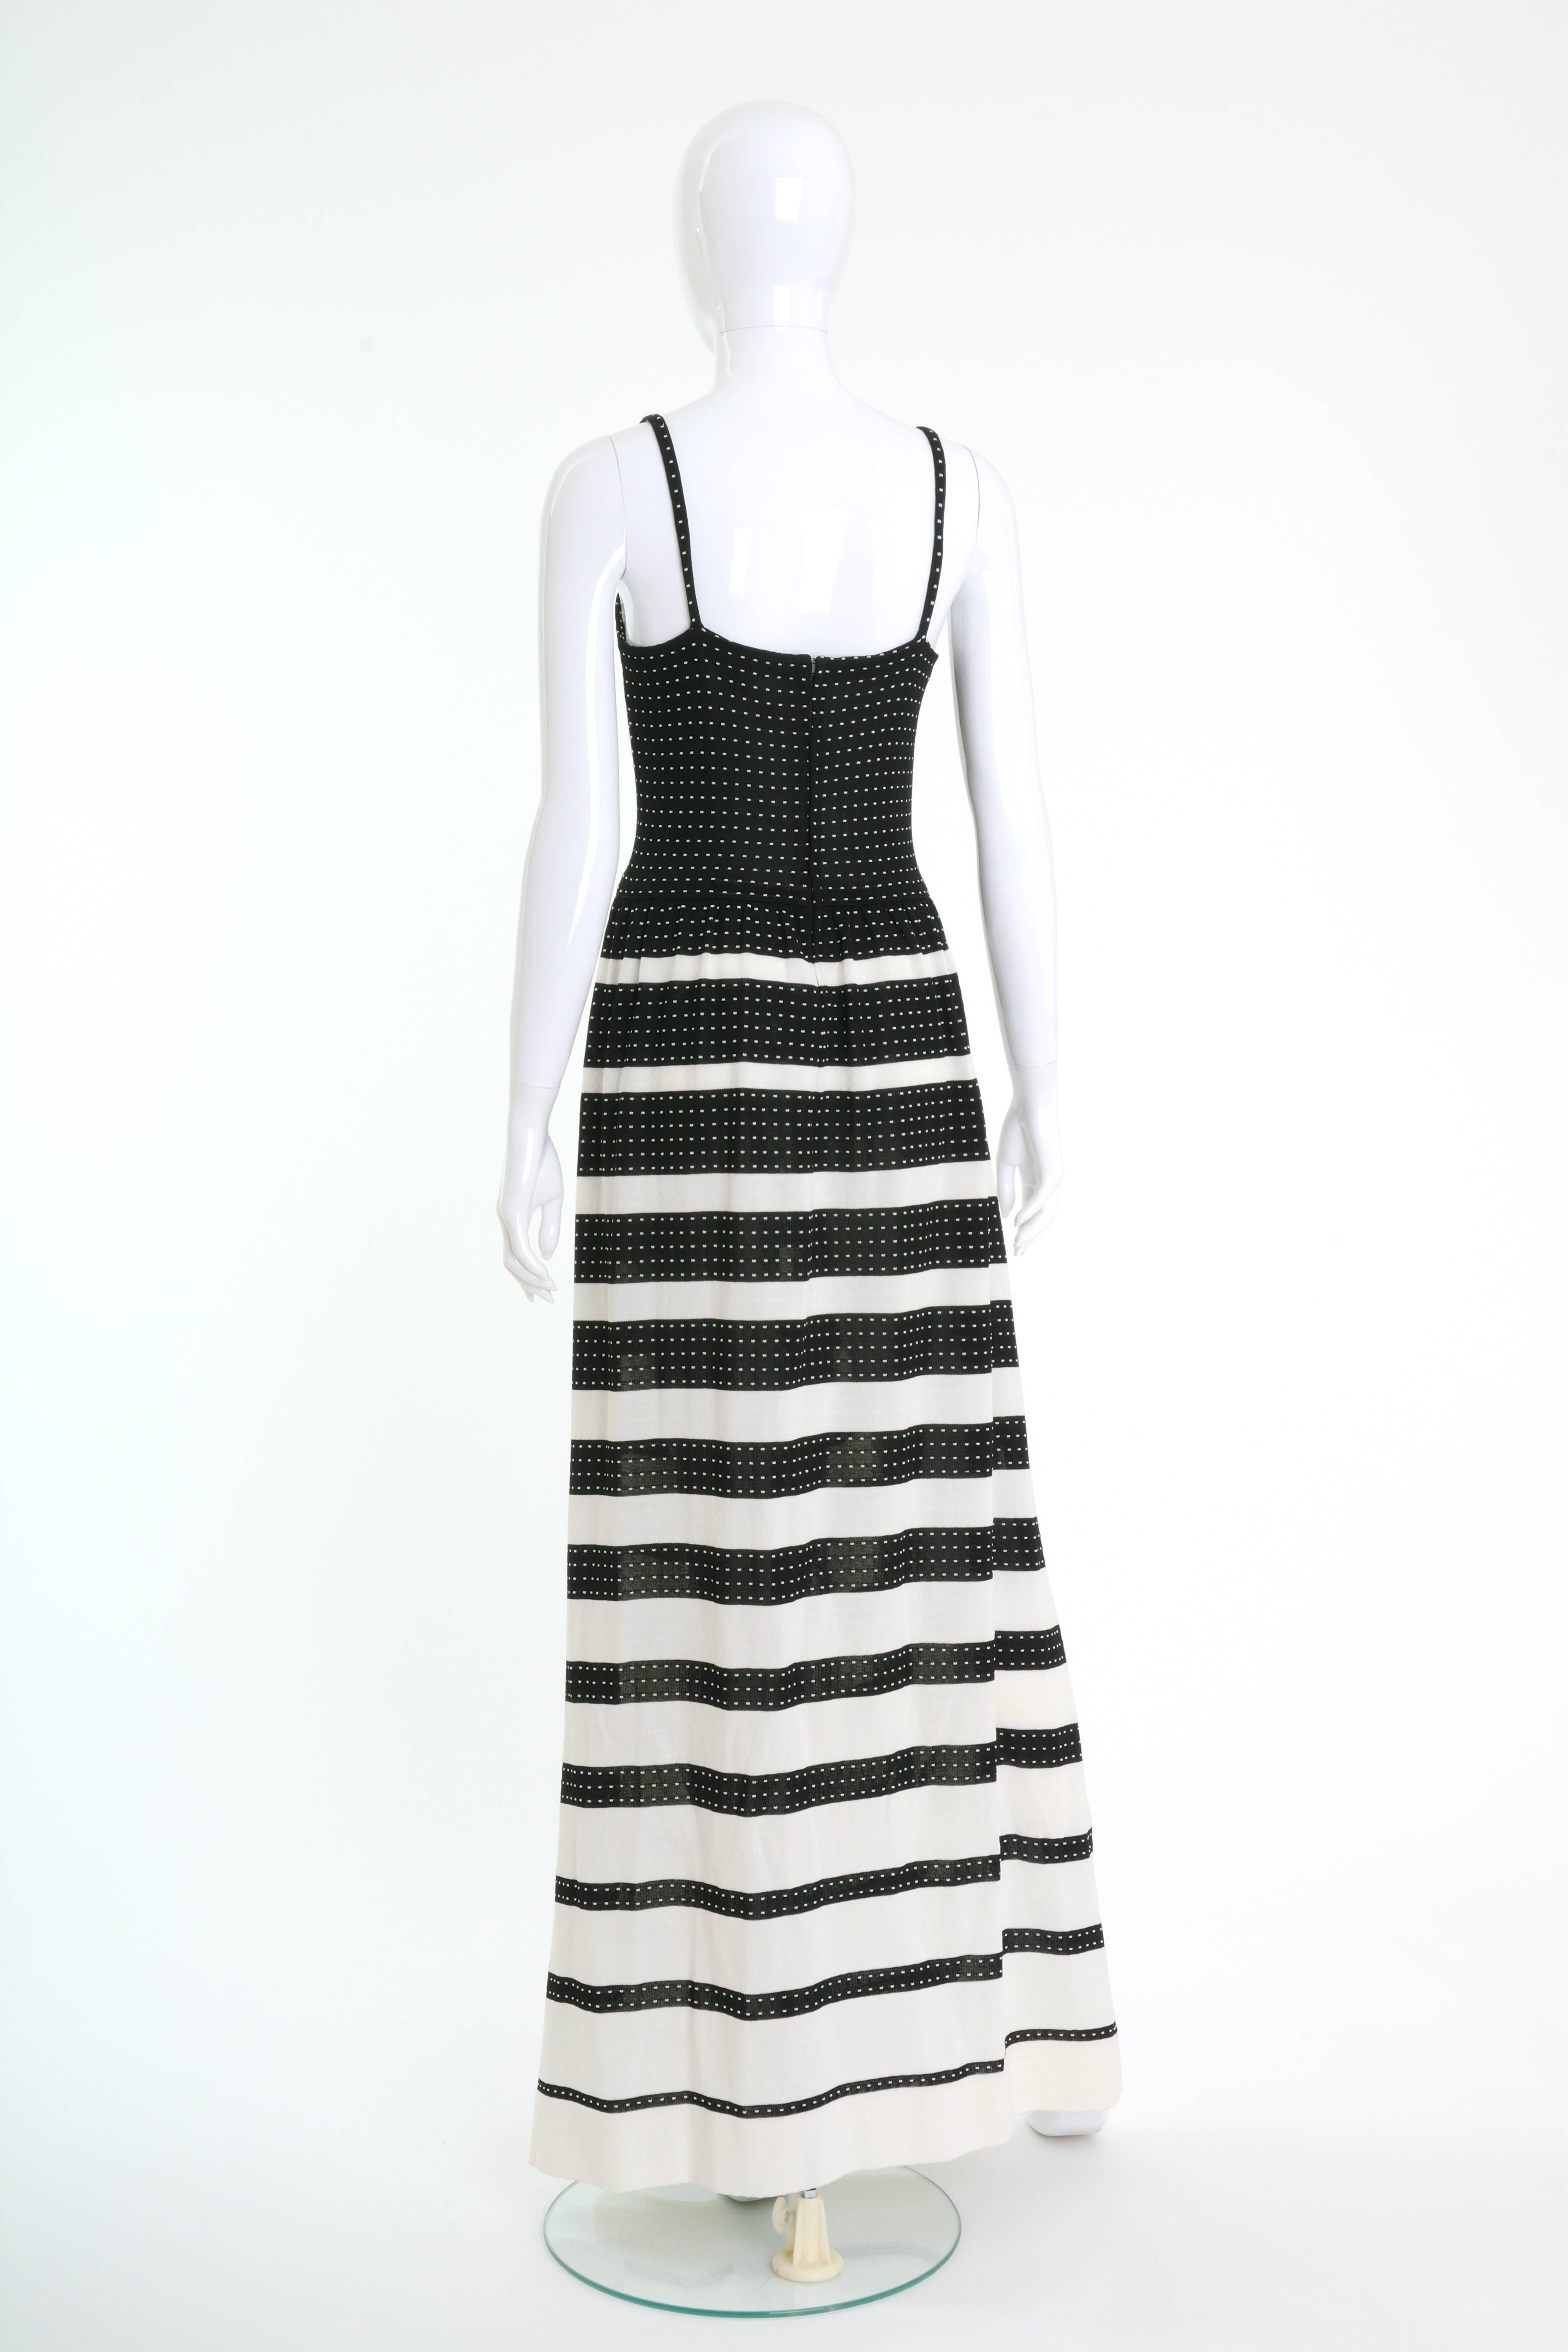 This lovely 1970s Lanvin long dress is in black and white knitted fabric with striped print skirt. It has spaghetti straps and back zip closure. 

Very good vintage condition

Label: Lanvin Paris
Fabric: polyester 
Color :